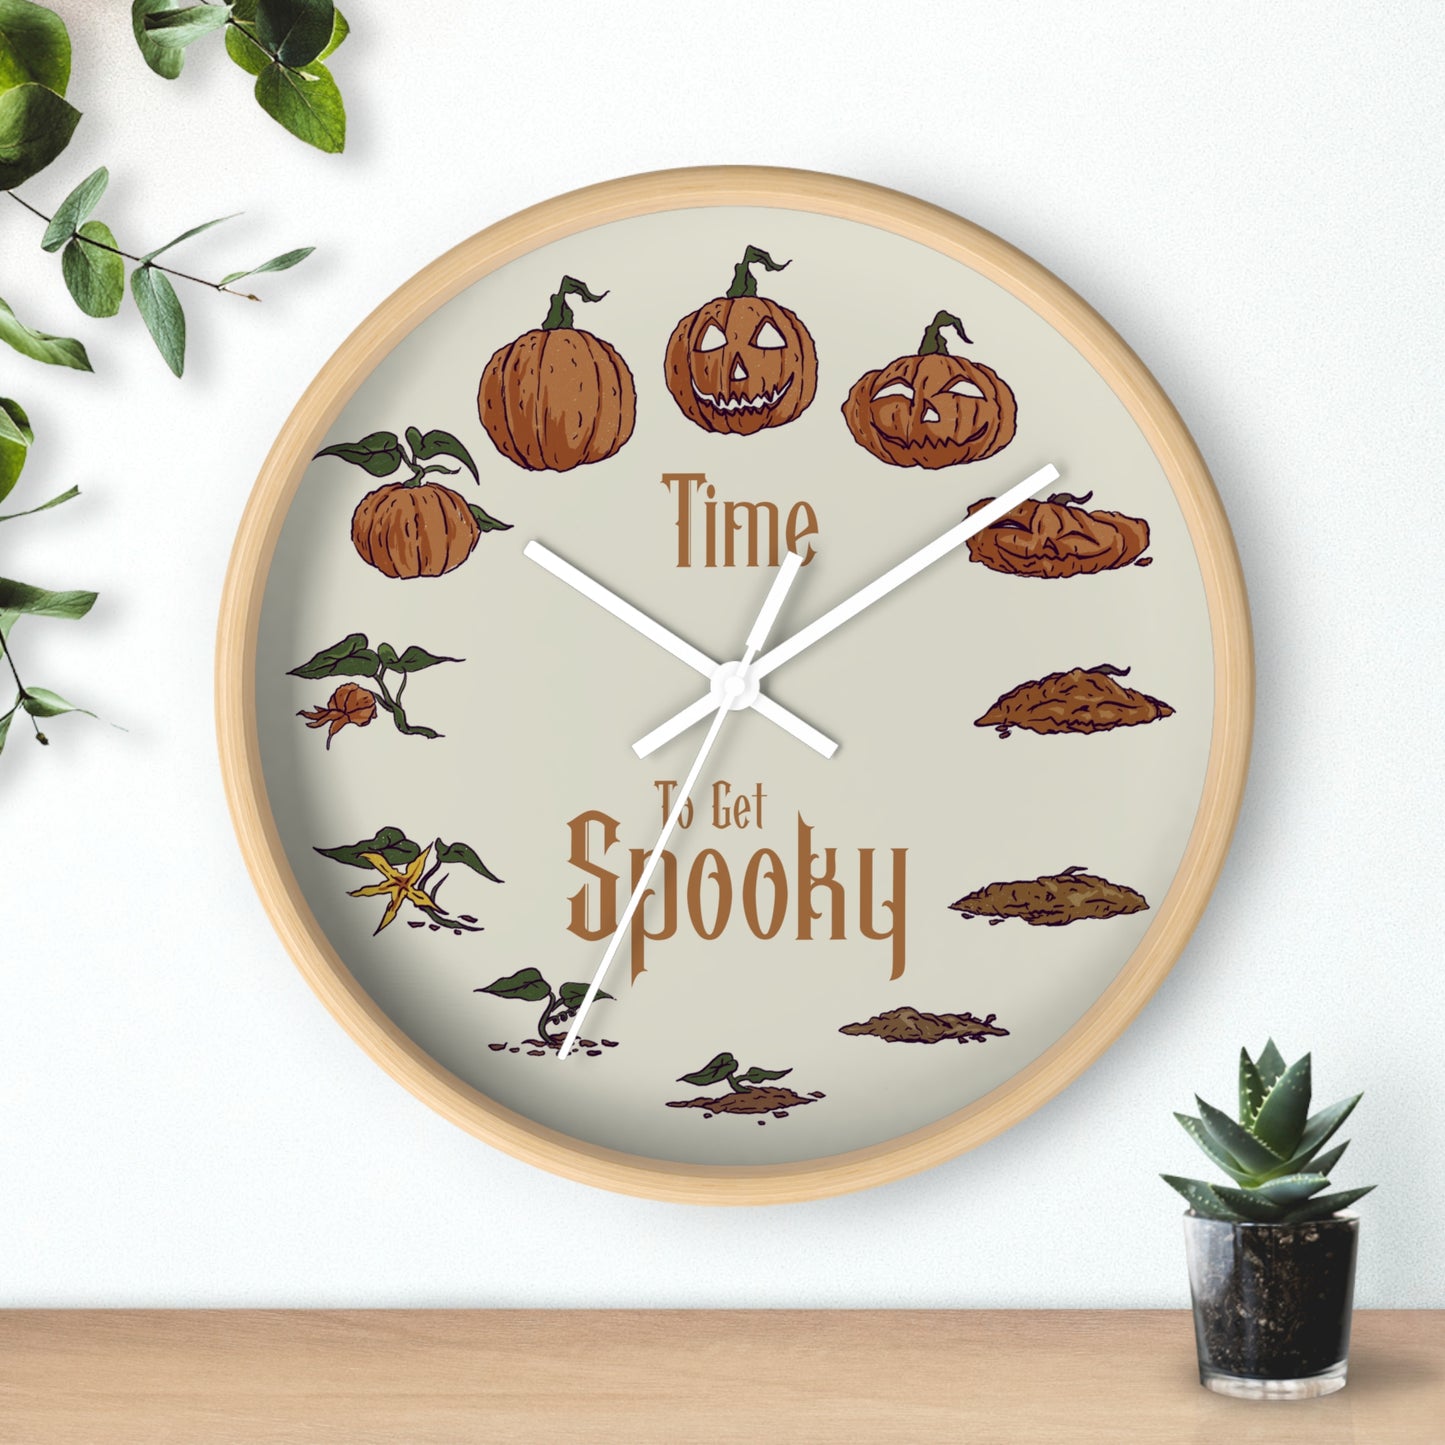 Time To Get Spooky | Pumpkin Life-Cycle Wall Clock | 10" | Halloween Home Decor